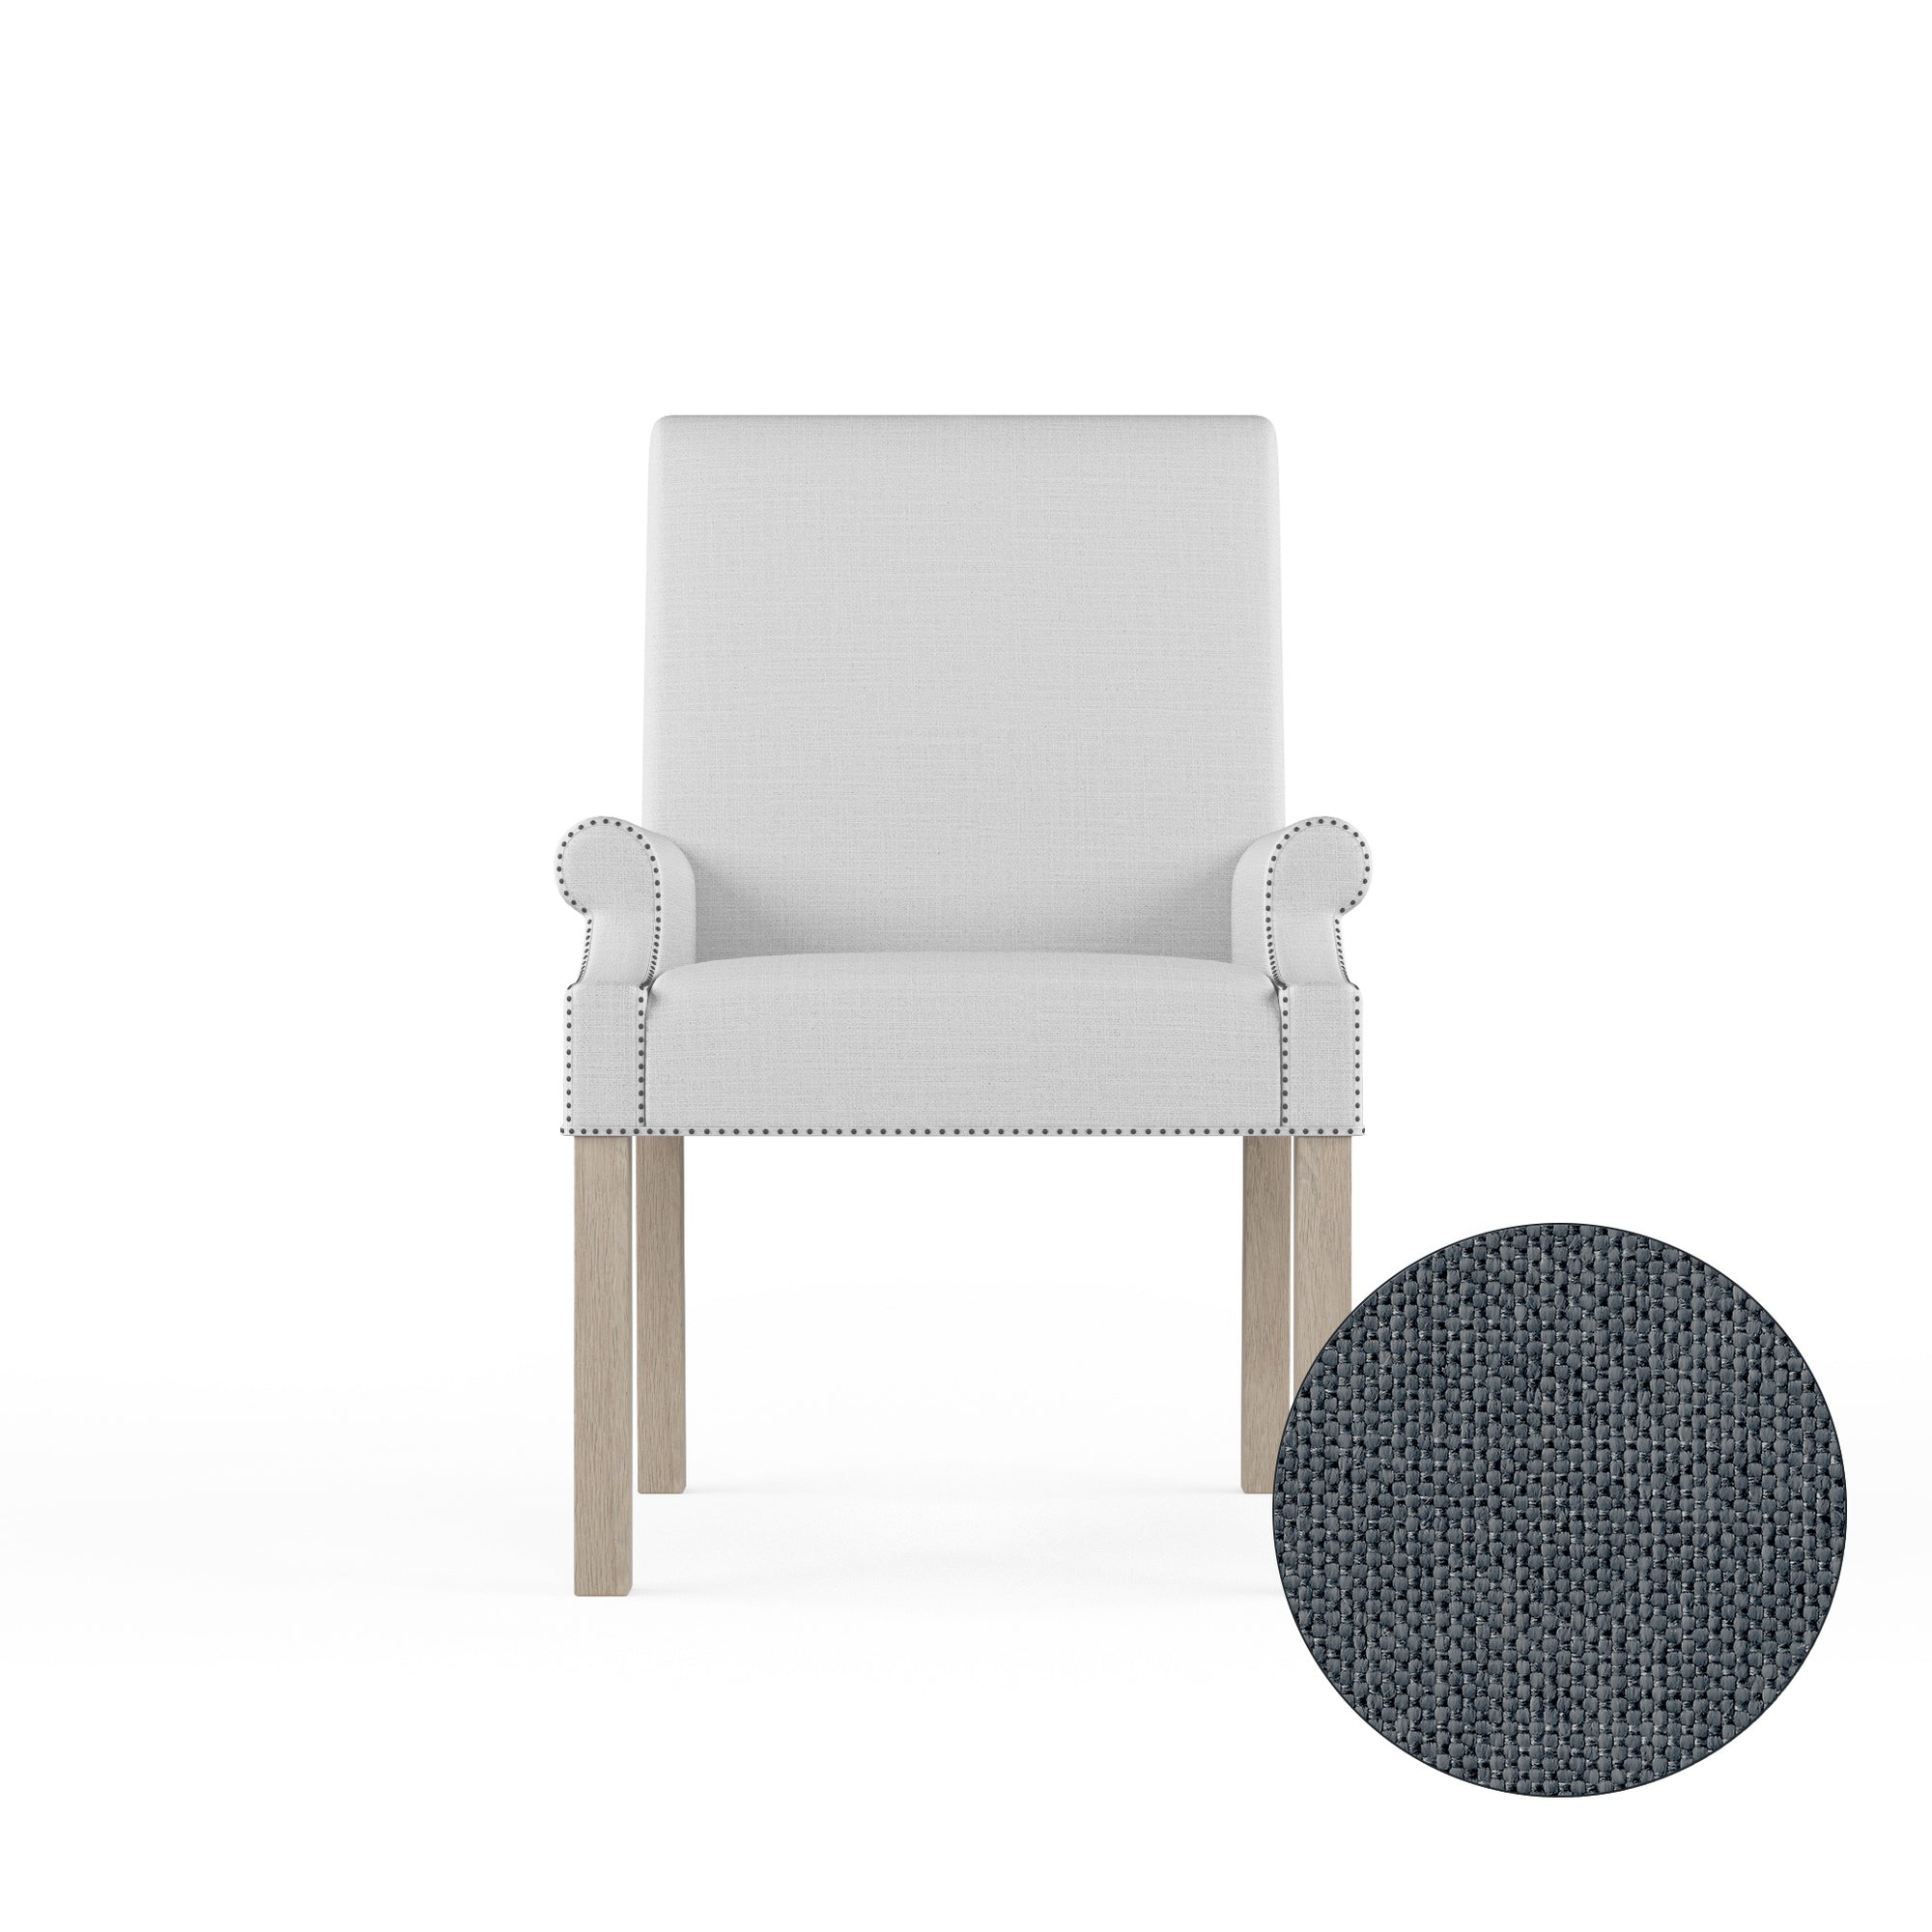 Abigail Dining Chair - Bluebell Pebble Weave Linen